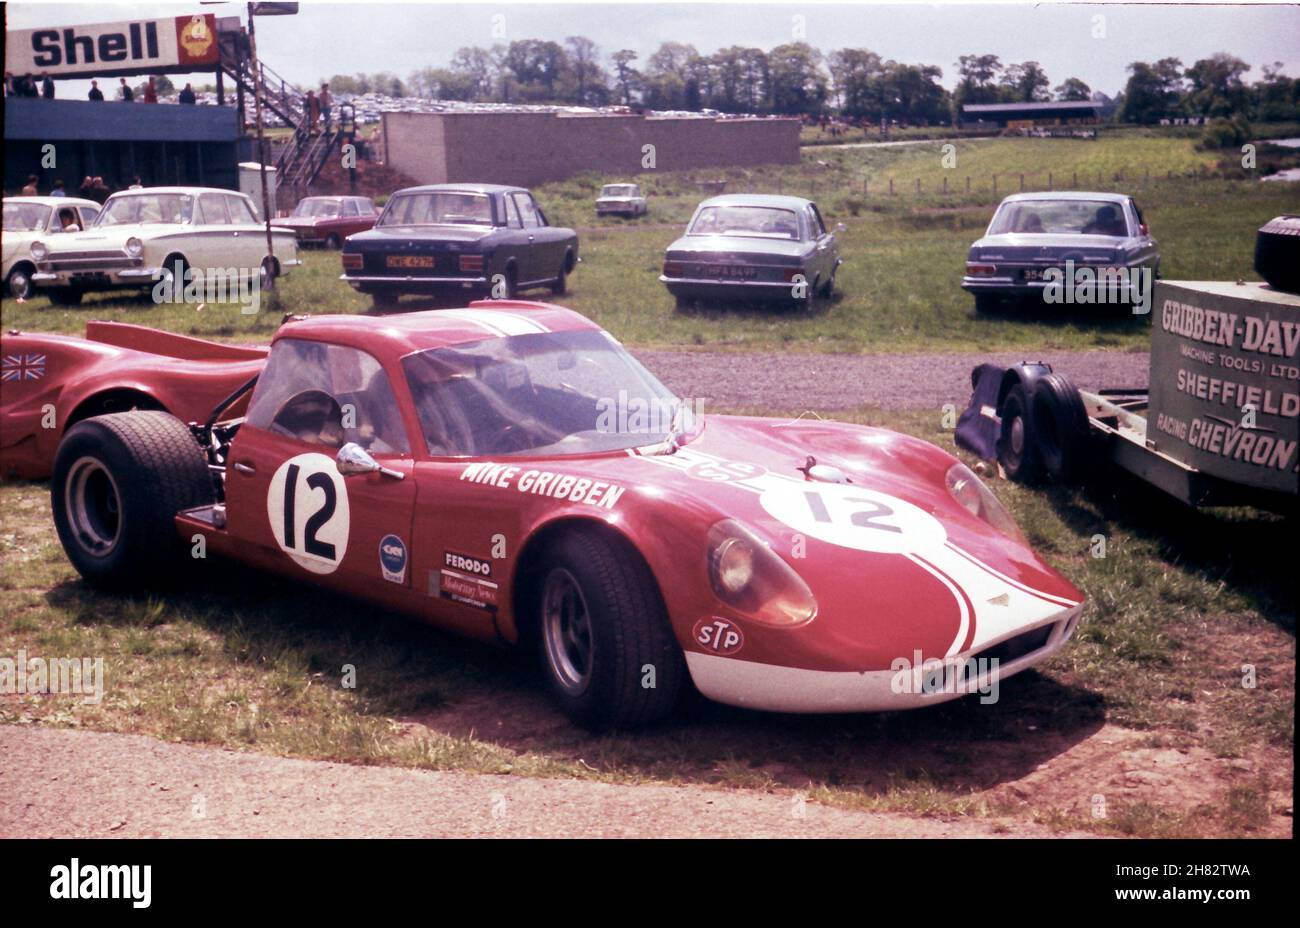 Car #12, mike Gribben's Chevron B8, in the Mallory Park paddock, Monday May 25th 1970.  The car was entered in the SKF Championship race for GT cars at the BRSCC organised Guards Holiday F5000 meeting. Stock Photo